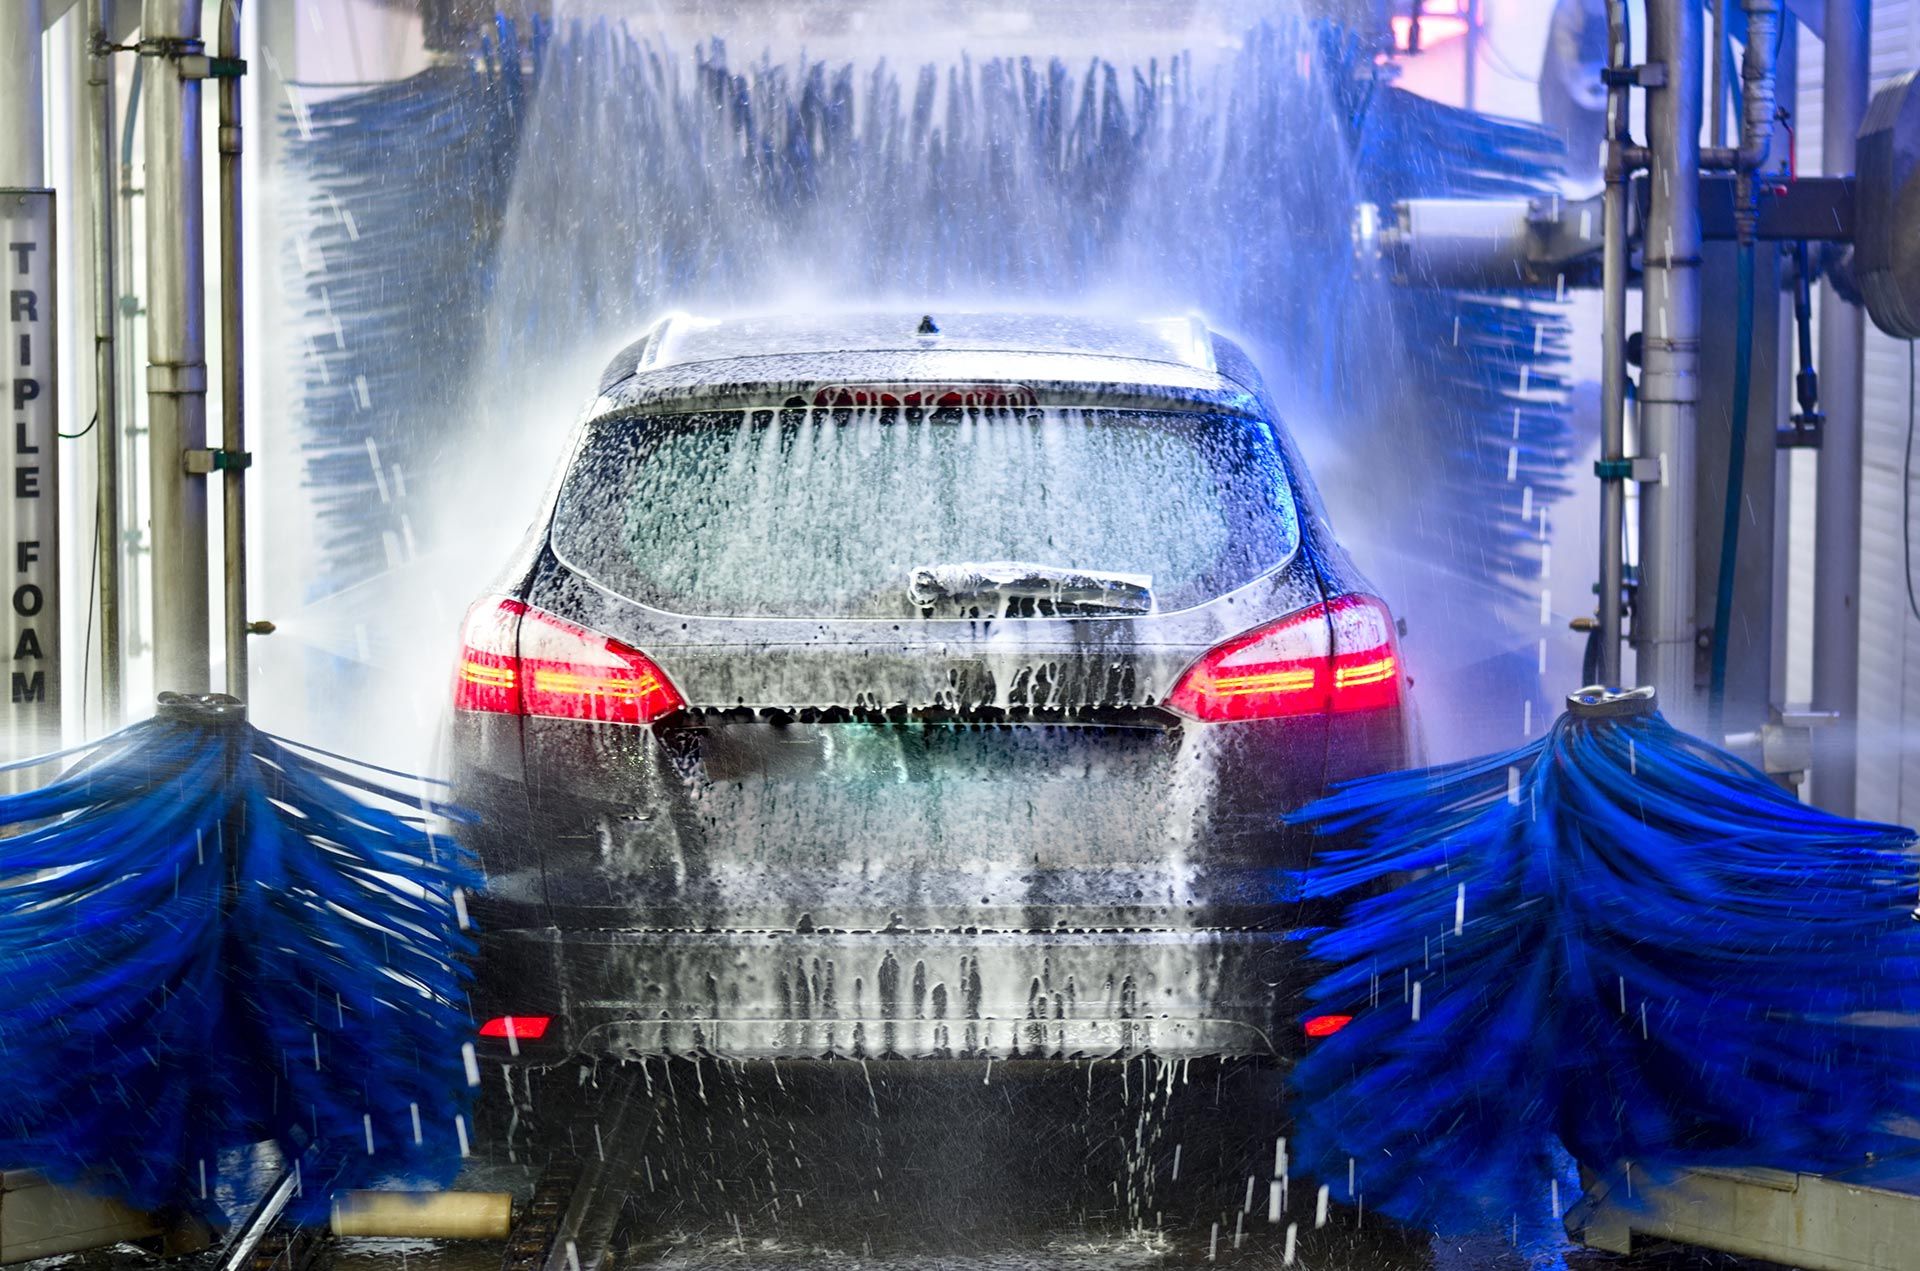 Car washes can optimize water reclamation with the BioJac™ System by GreenEdge Technologies.